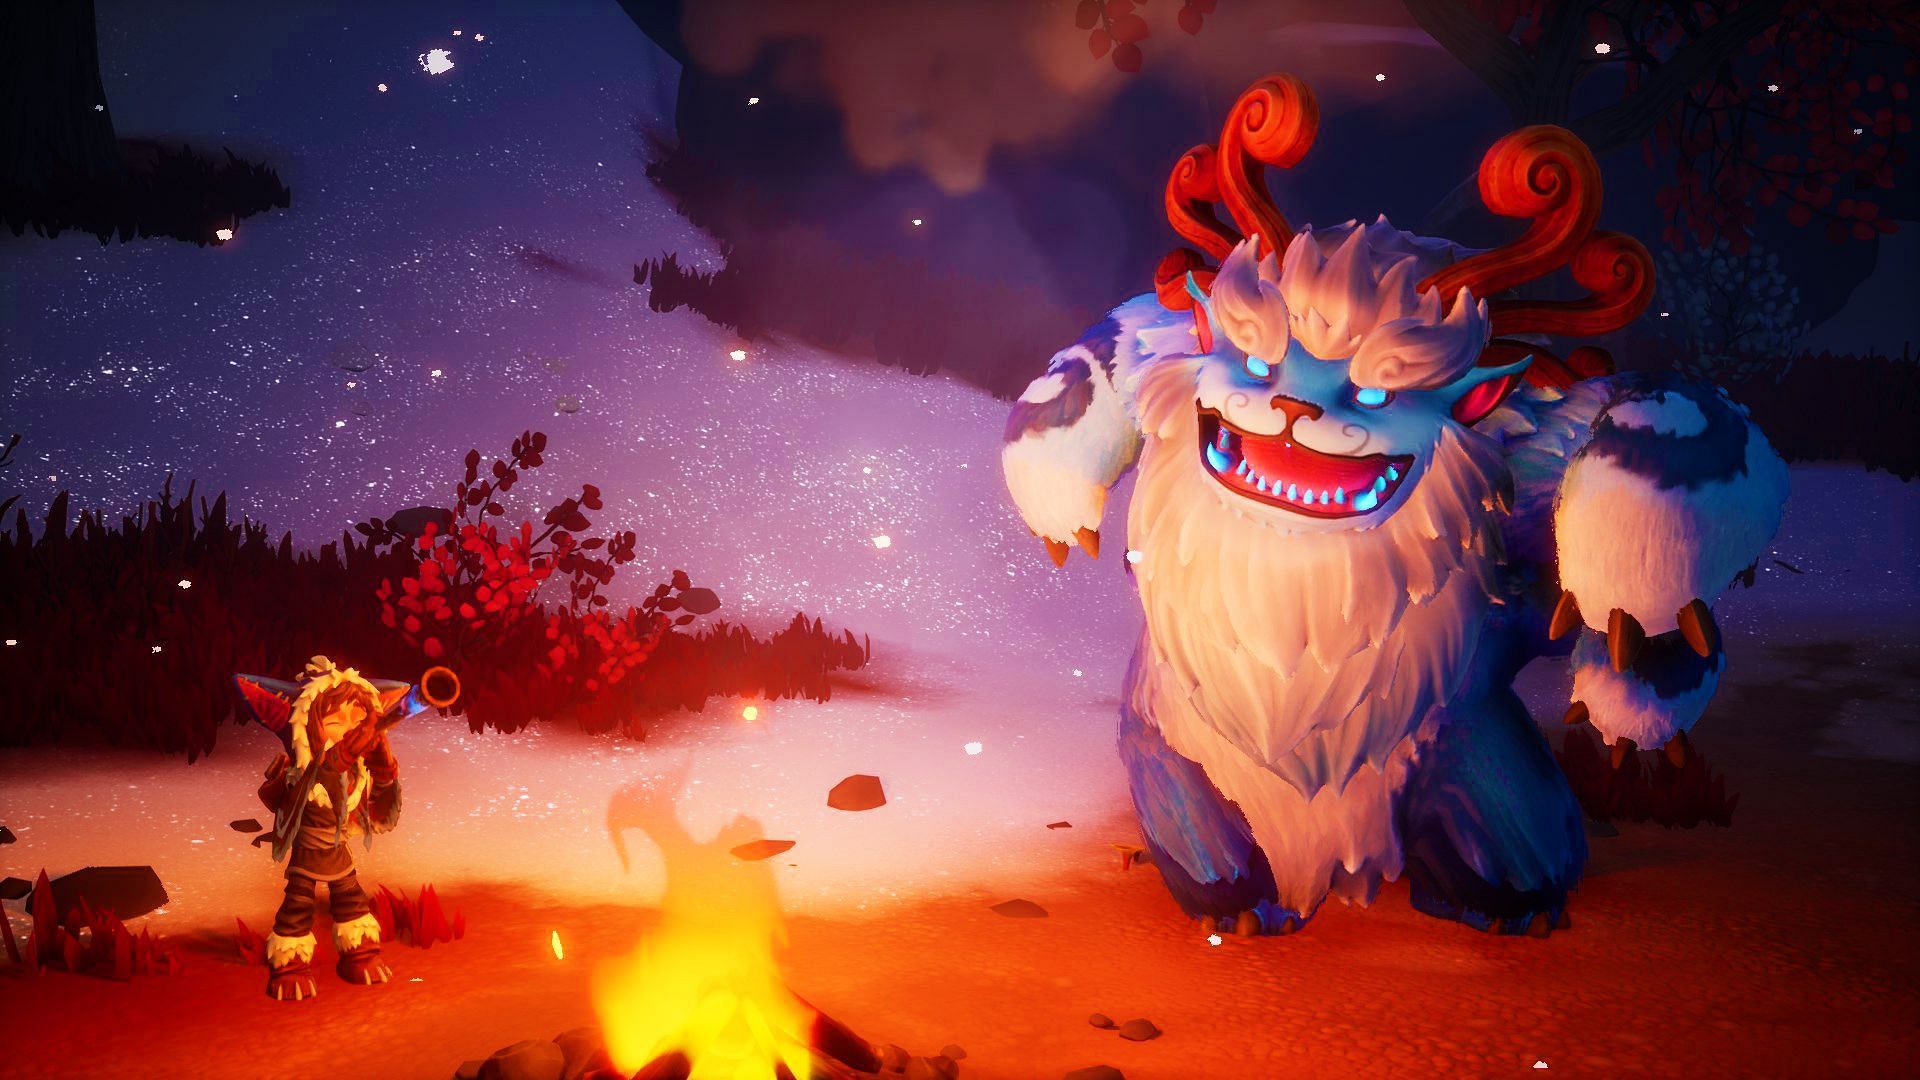 The bond between Nunu and Willump is truly heartwarming (Image via Riot Forge)